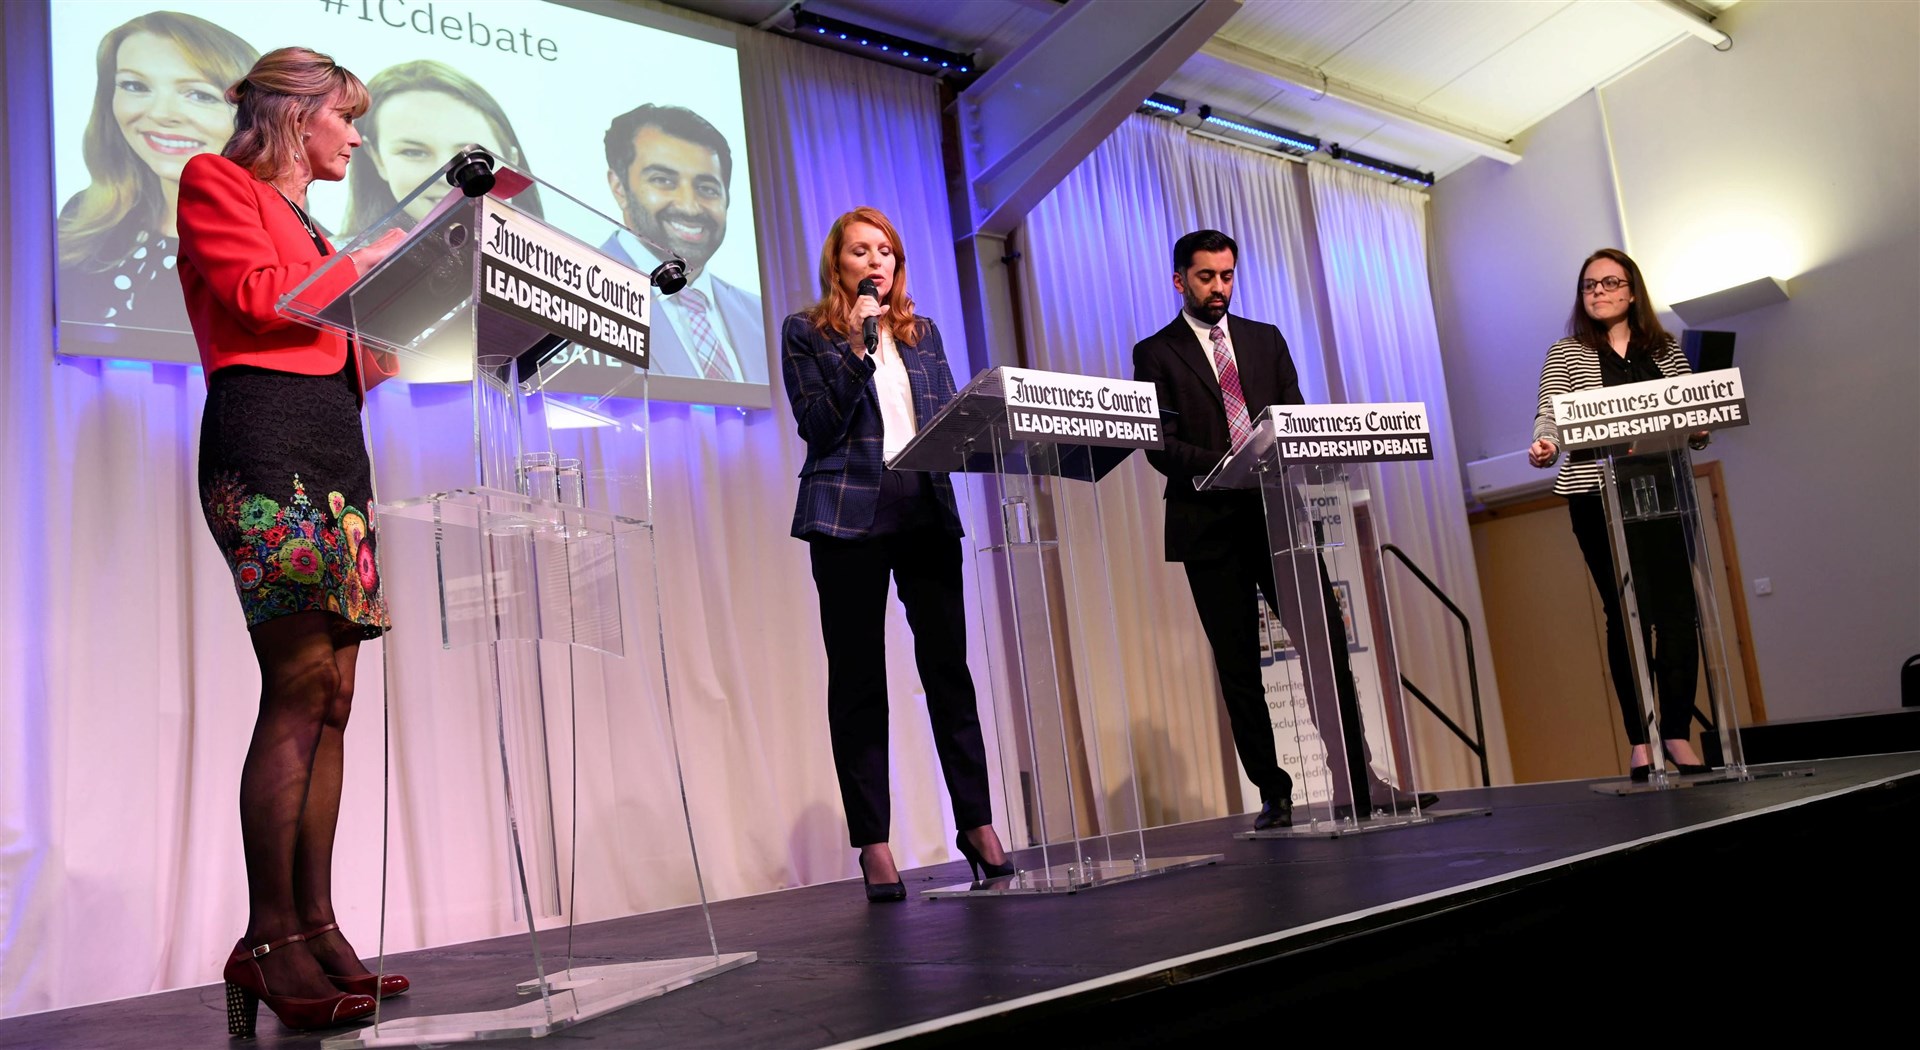 Nicky Marr, Ash Regan, Humza Yousaf and Kate Forbes at The Inverness Courier Leadership Debate. Picture: Callum Mackay